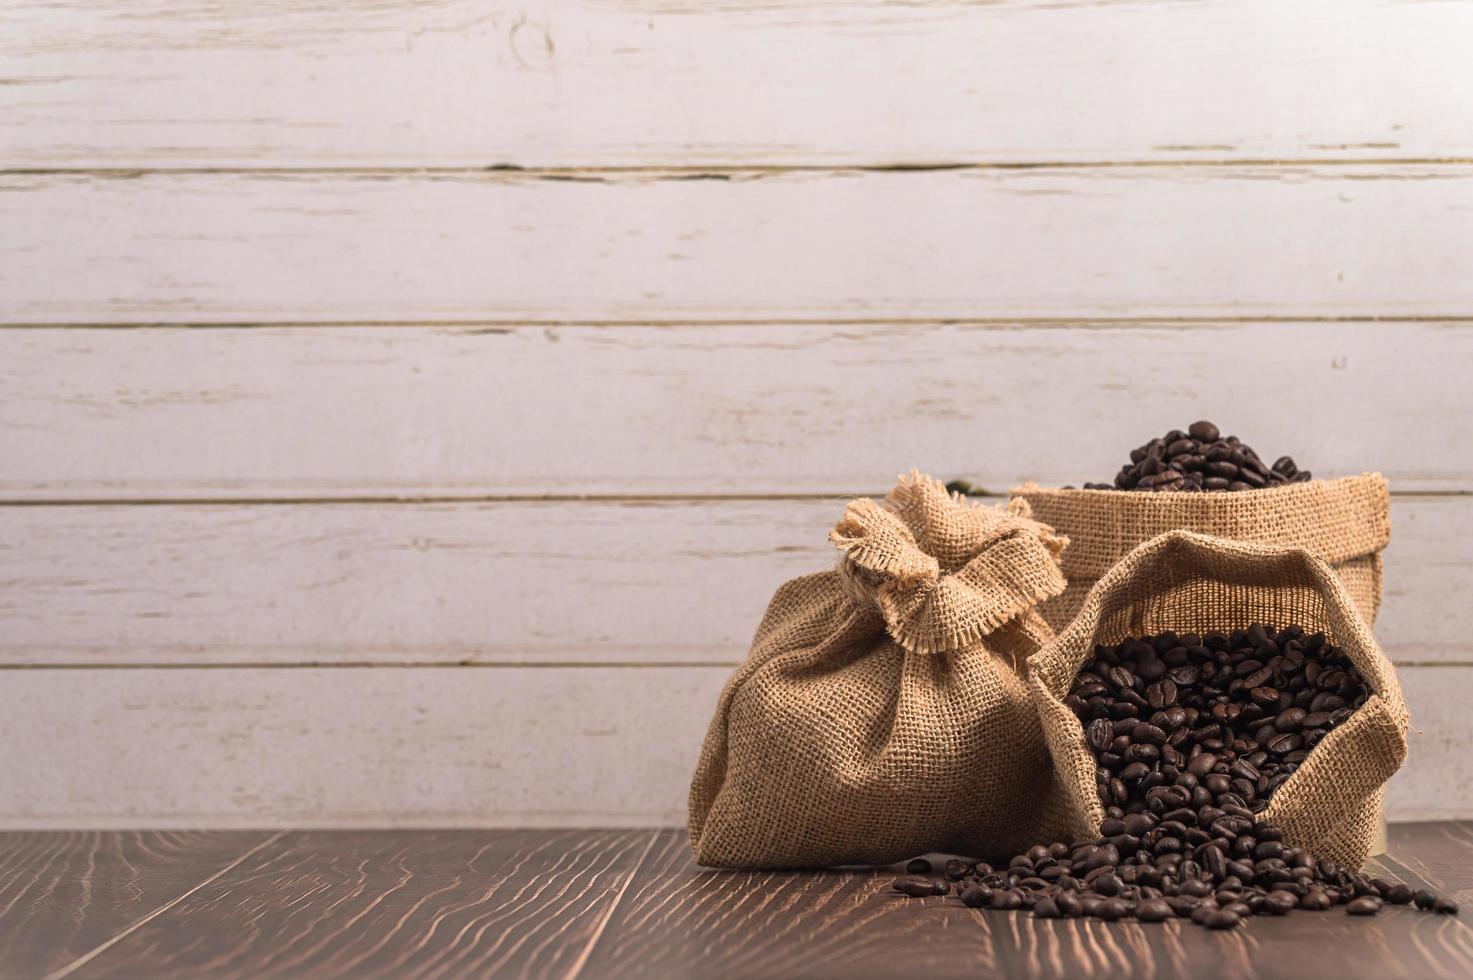 Bags of coffee beans on a wooden table photo